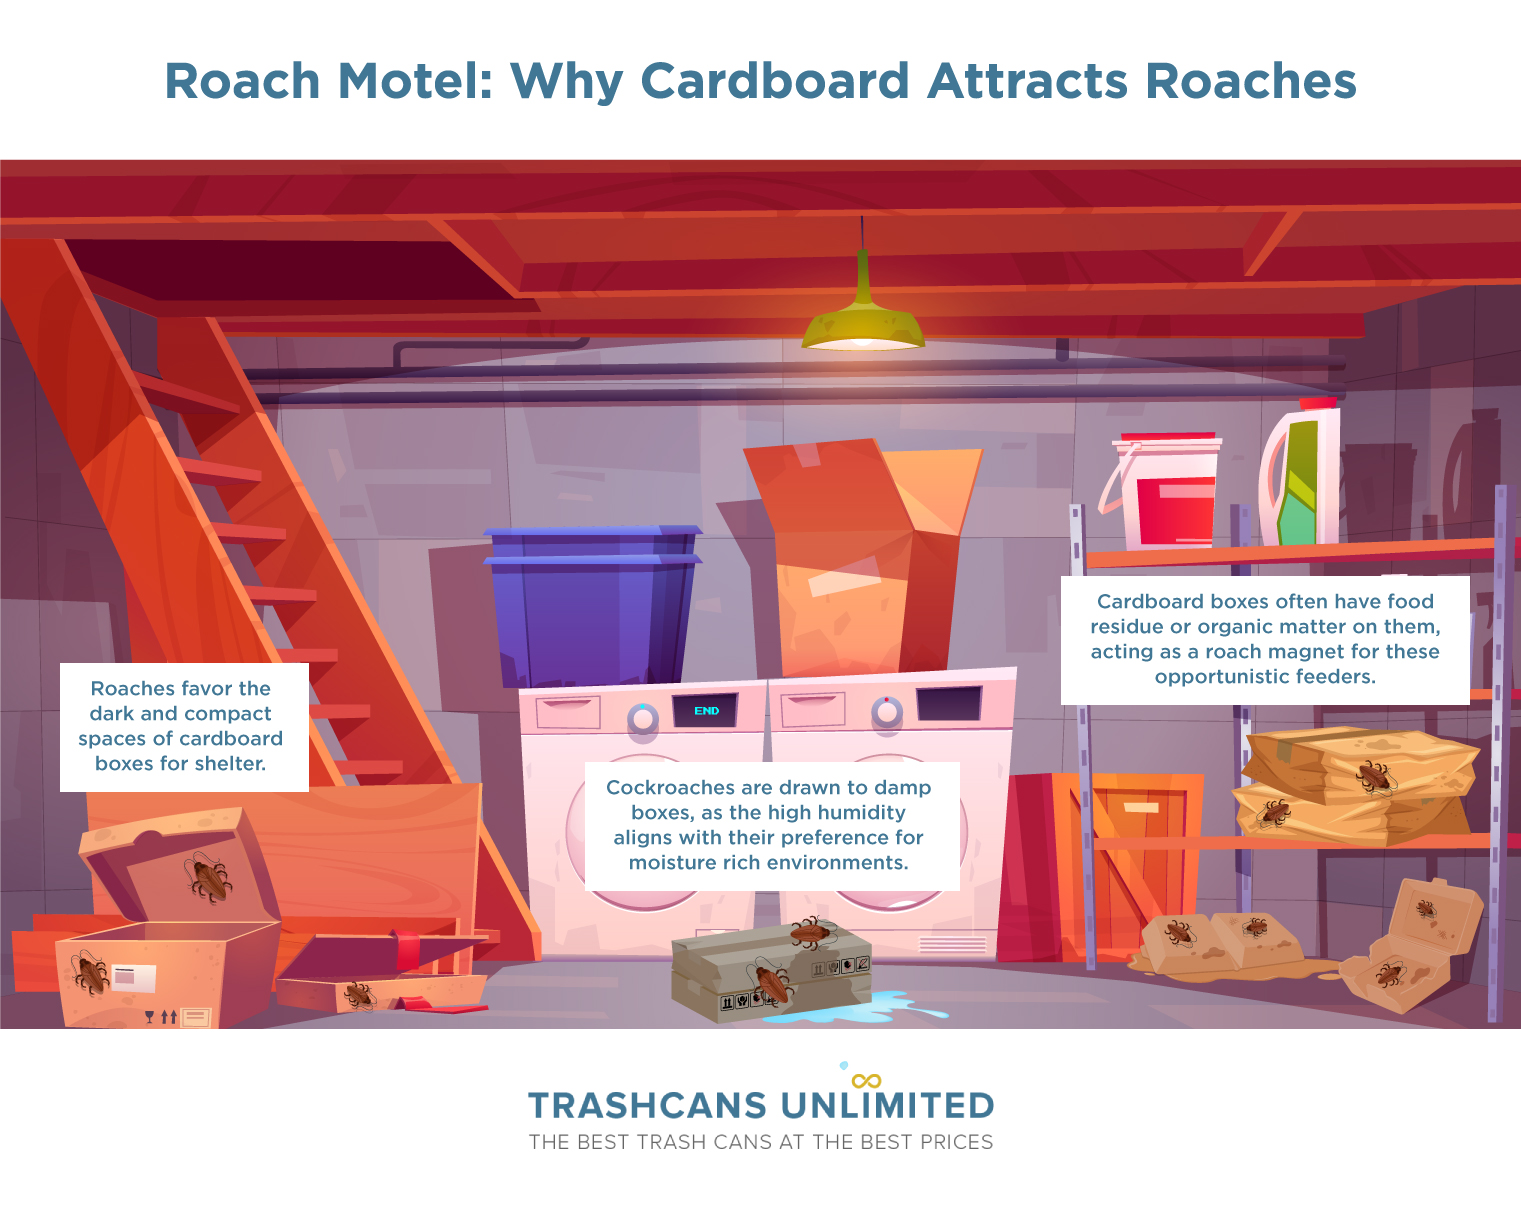 Roach Motel: Why Cardboard Attracts Roaches